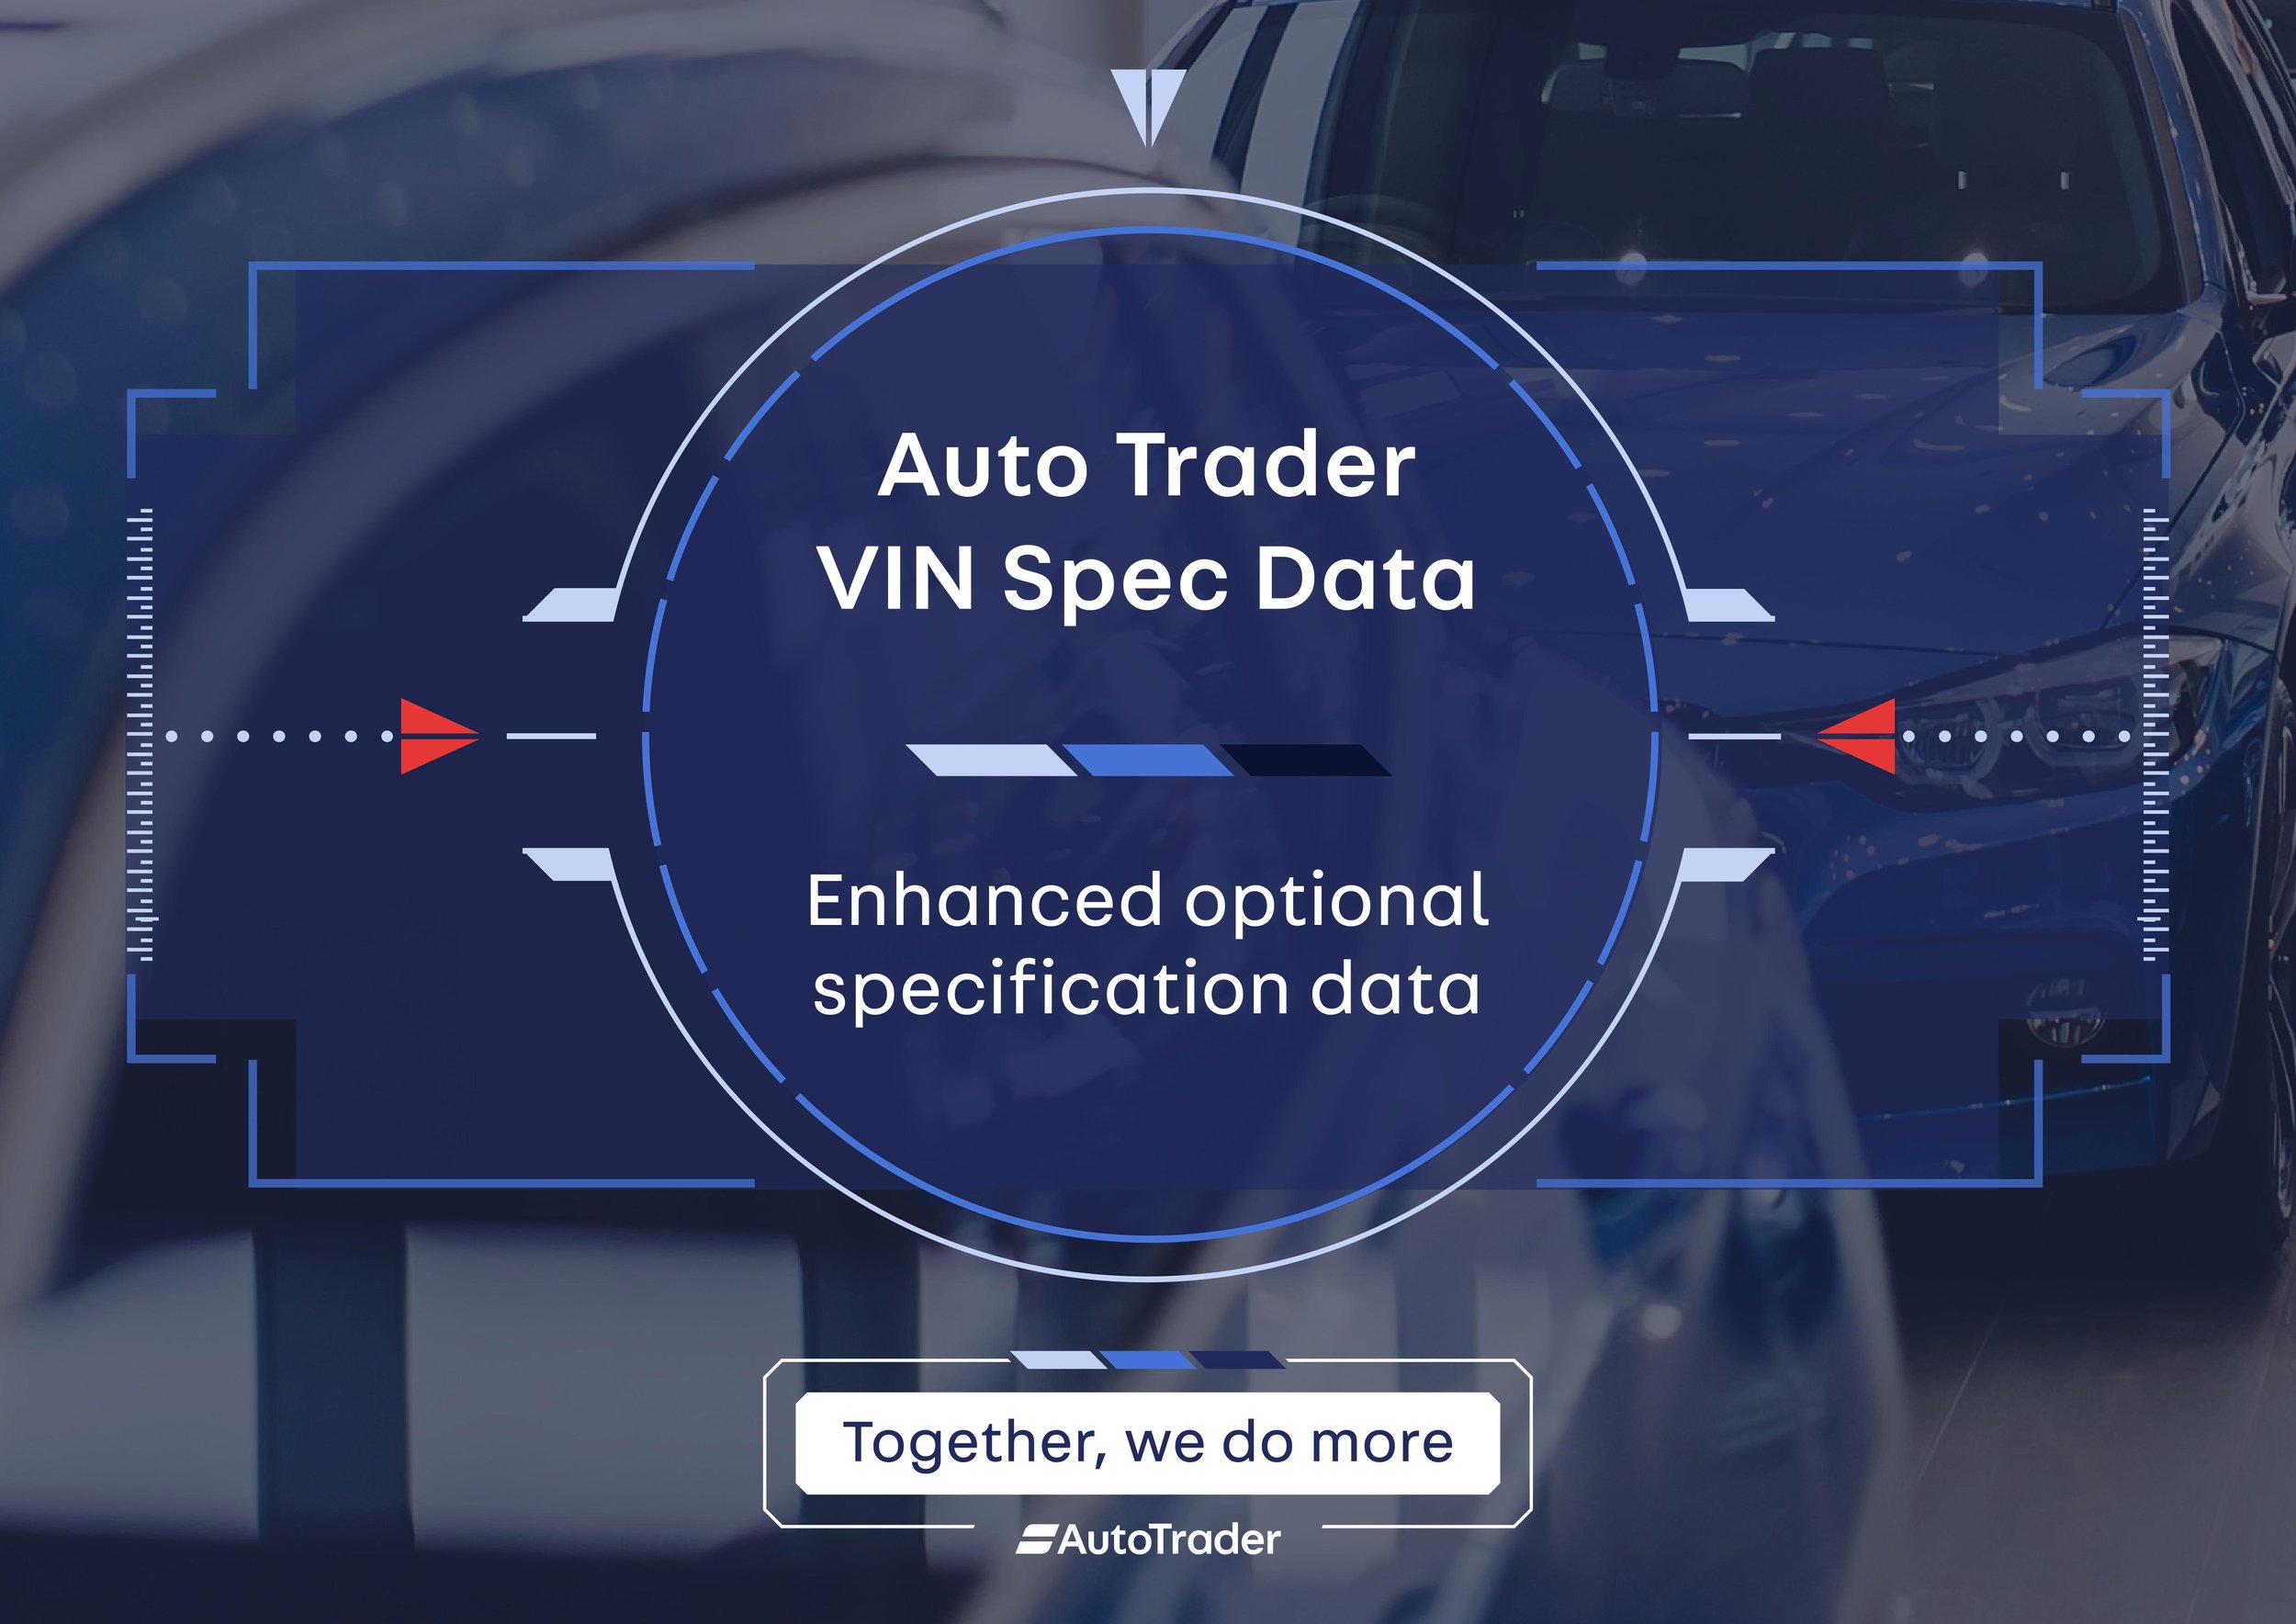 Optimise your customer experience with automatically selected optional specification